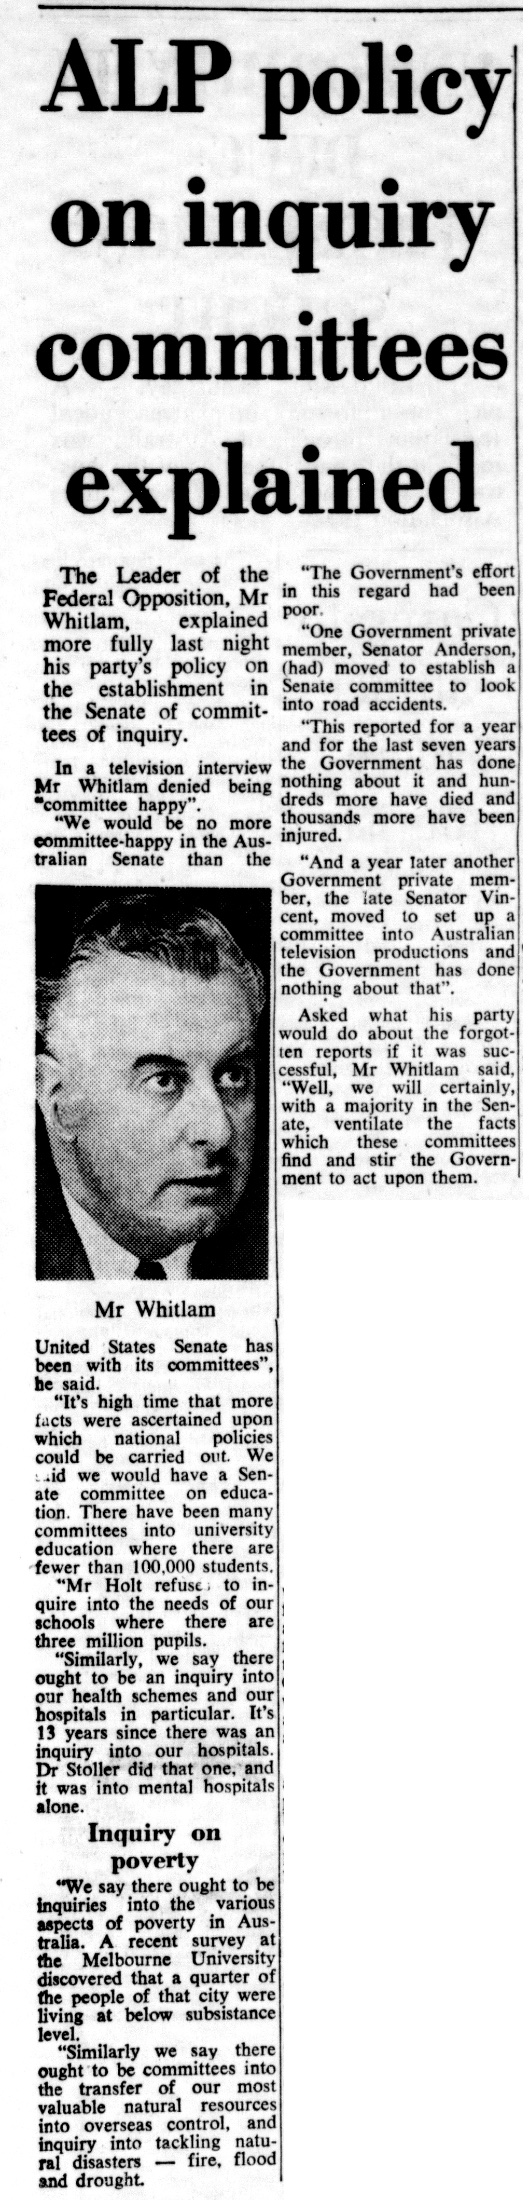 Canberra Times, 17 November 1967, p. 9, National Library of Australia, NX 254.